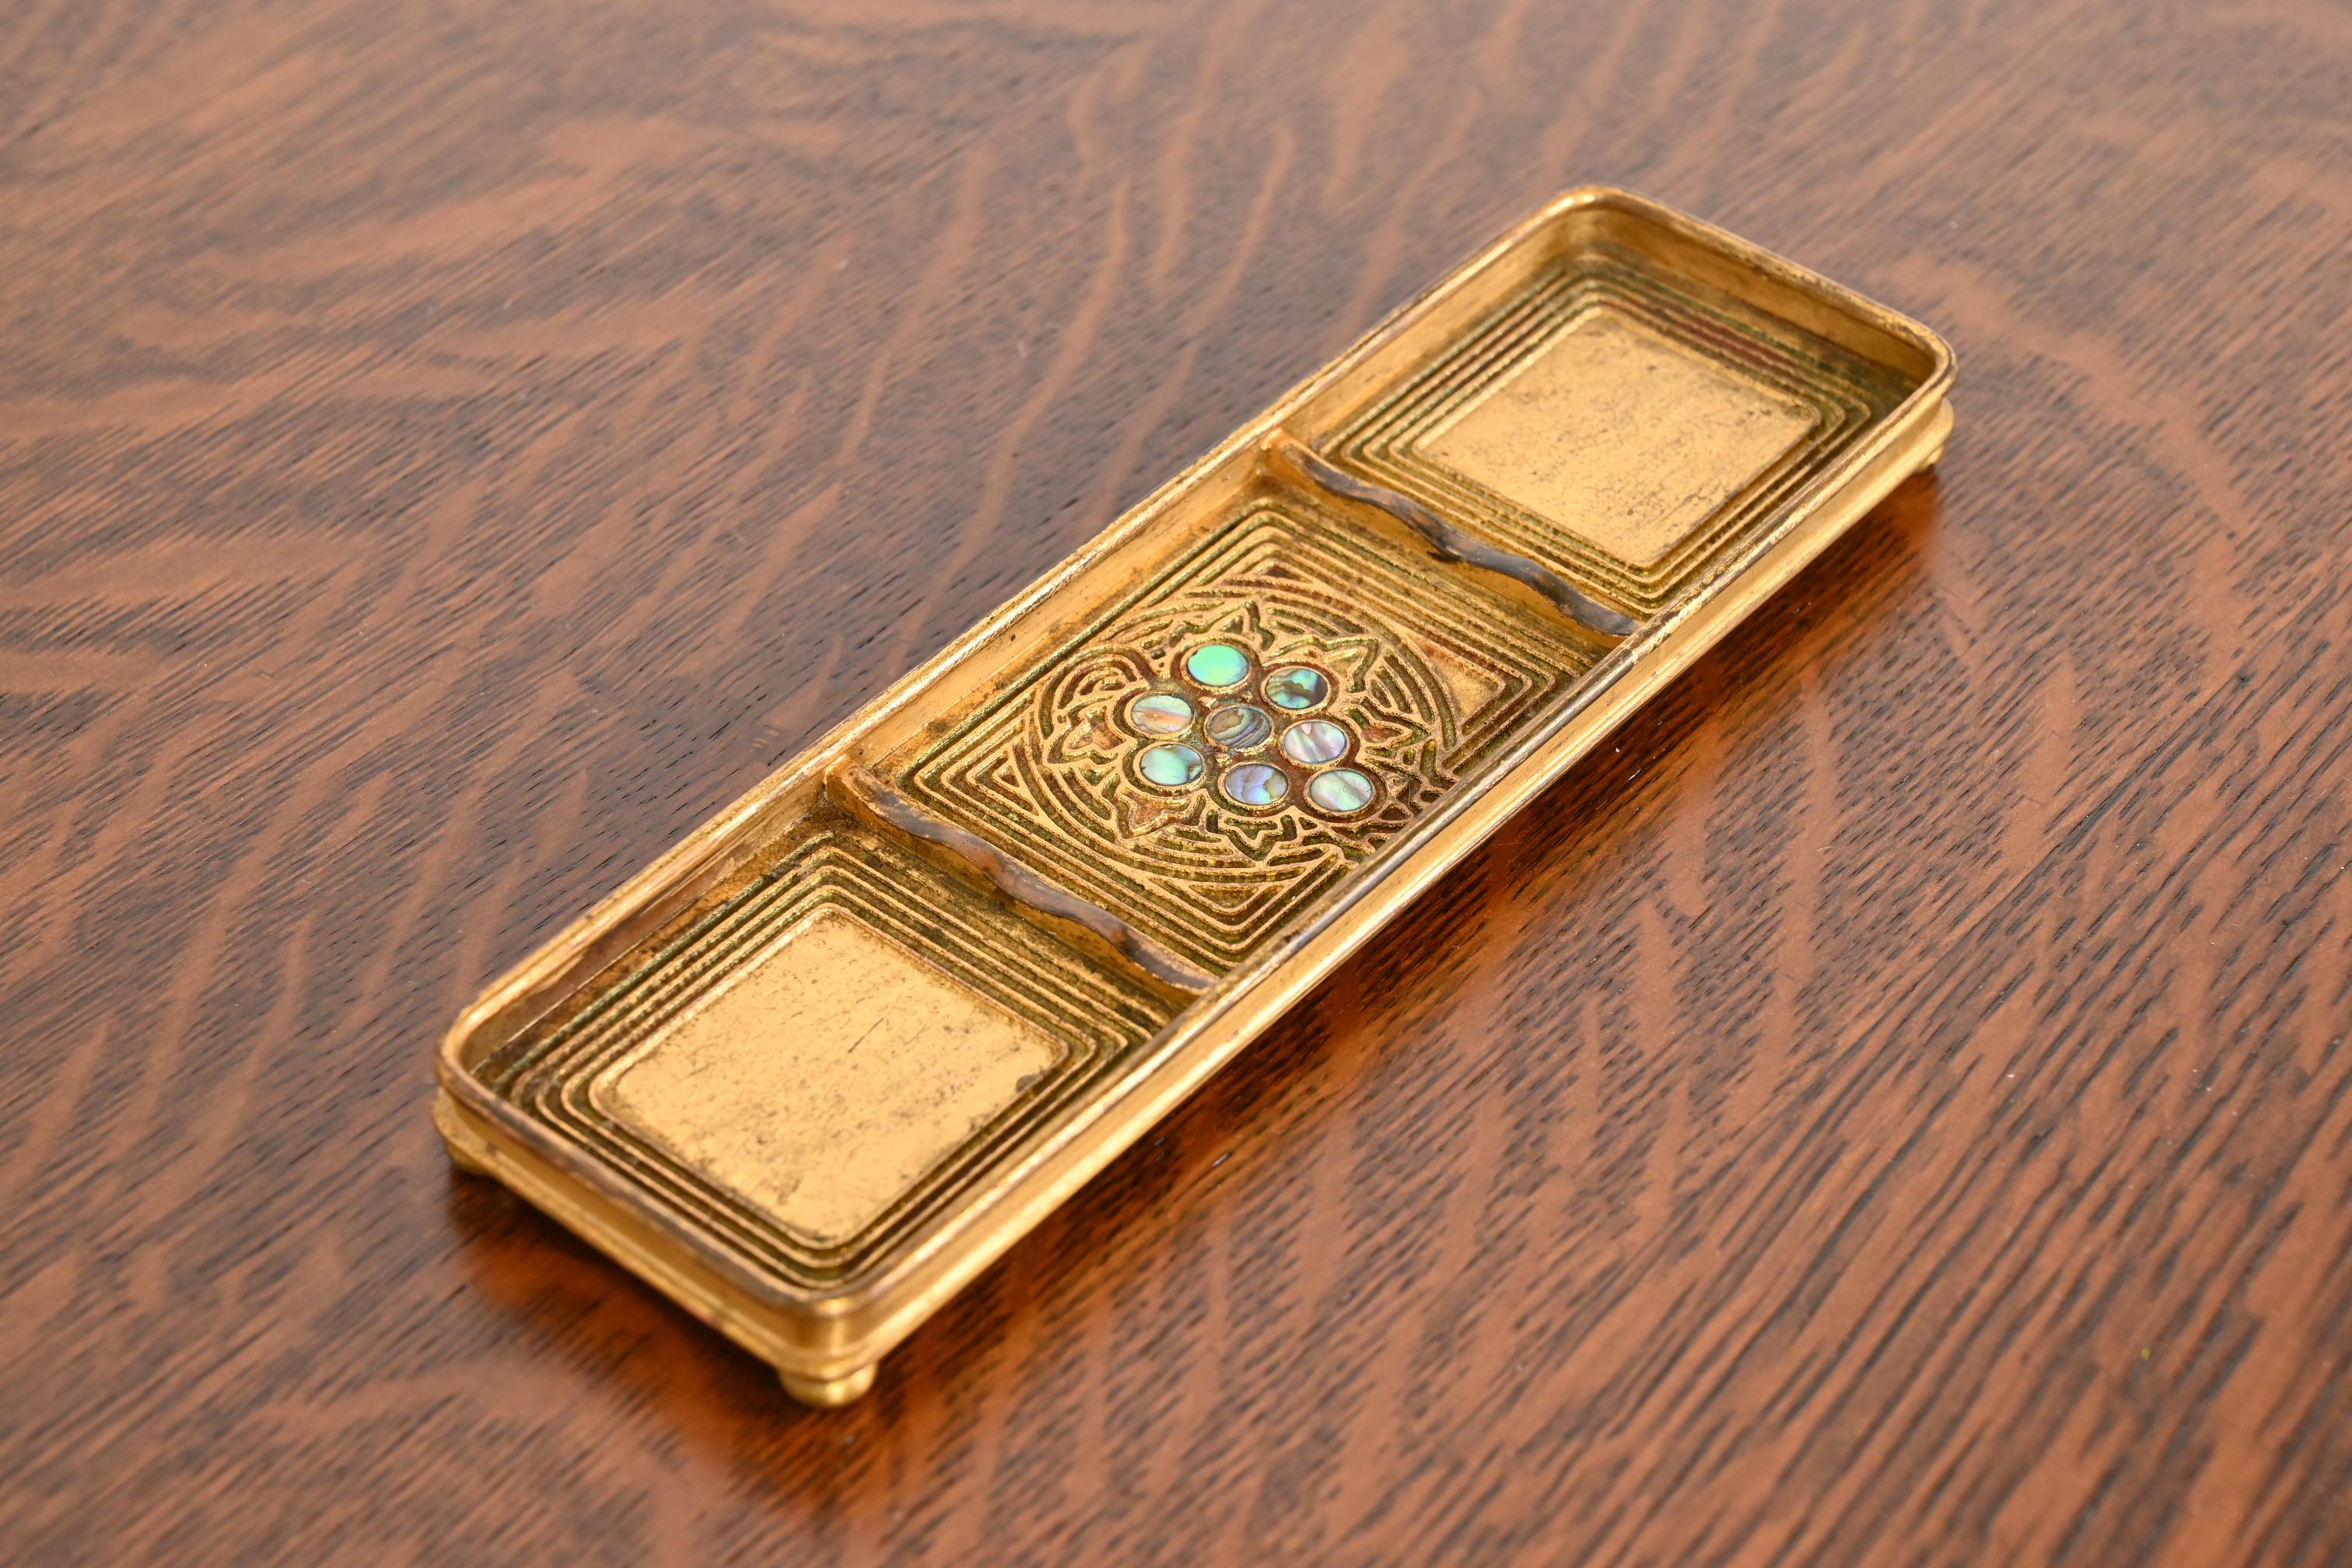 Tiffany Studios New York Bronze Doré and Abalone Pen Tray In Good Condition For Sale In South Bend, IN